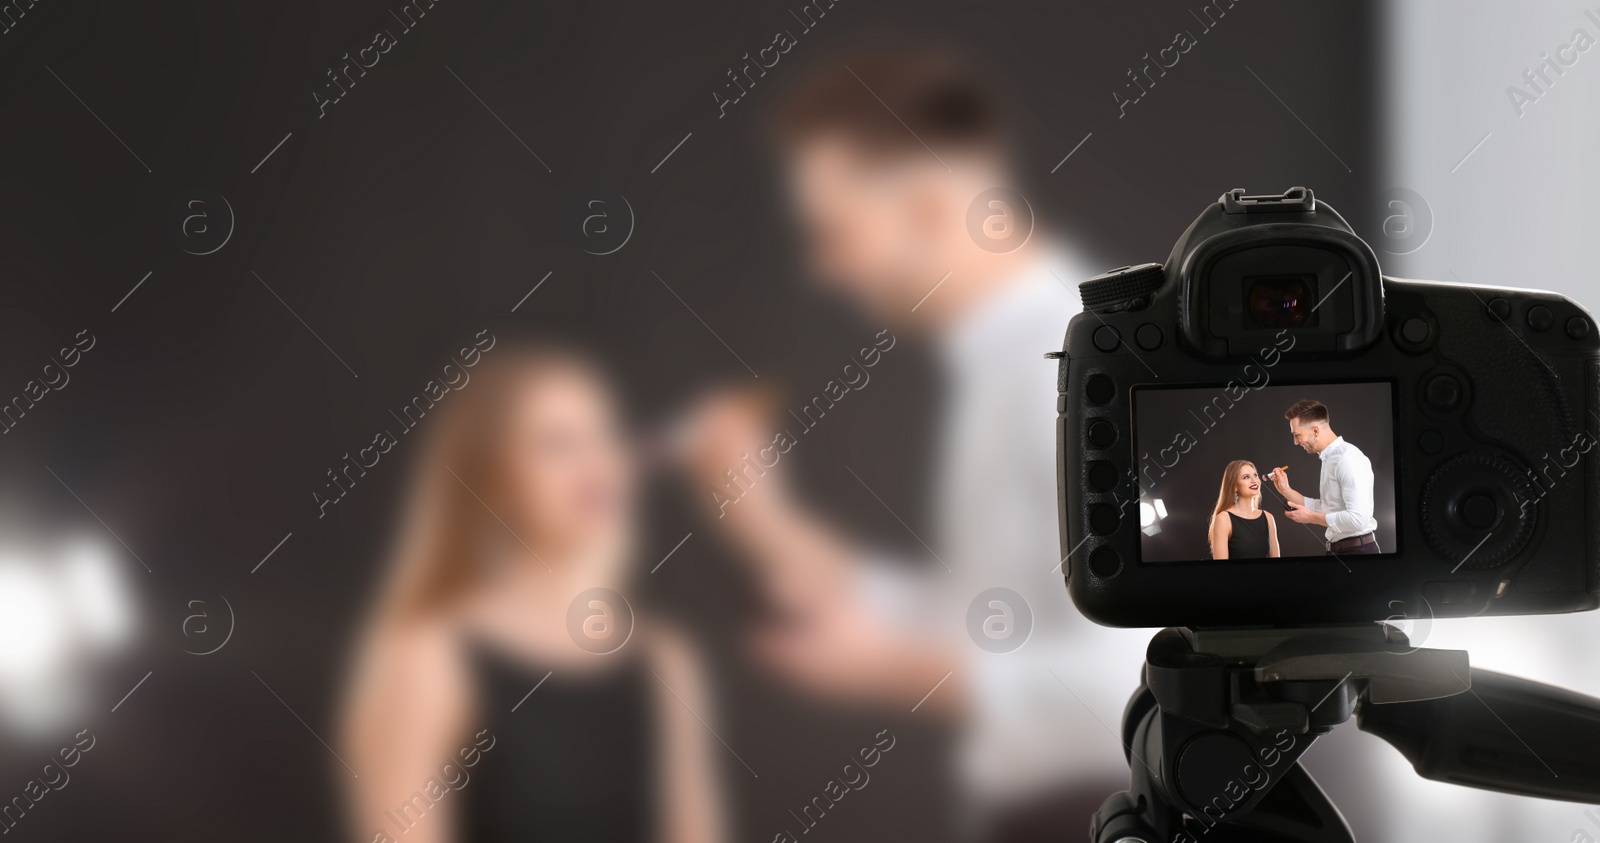 Image of Professional makeup artist working with beautiful young woman in photo studio, selective focus on camera display